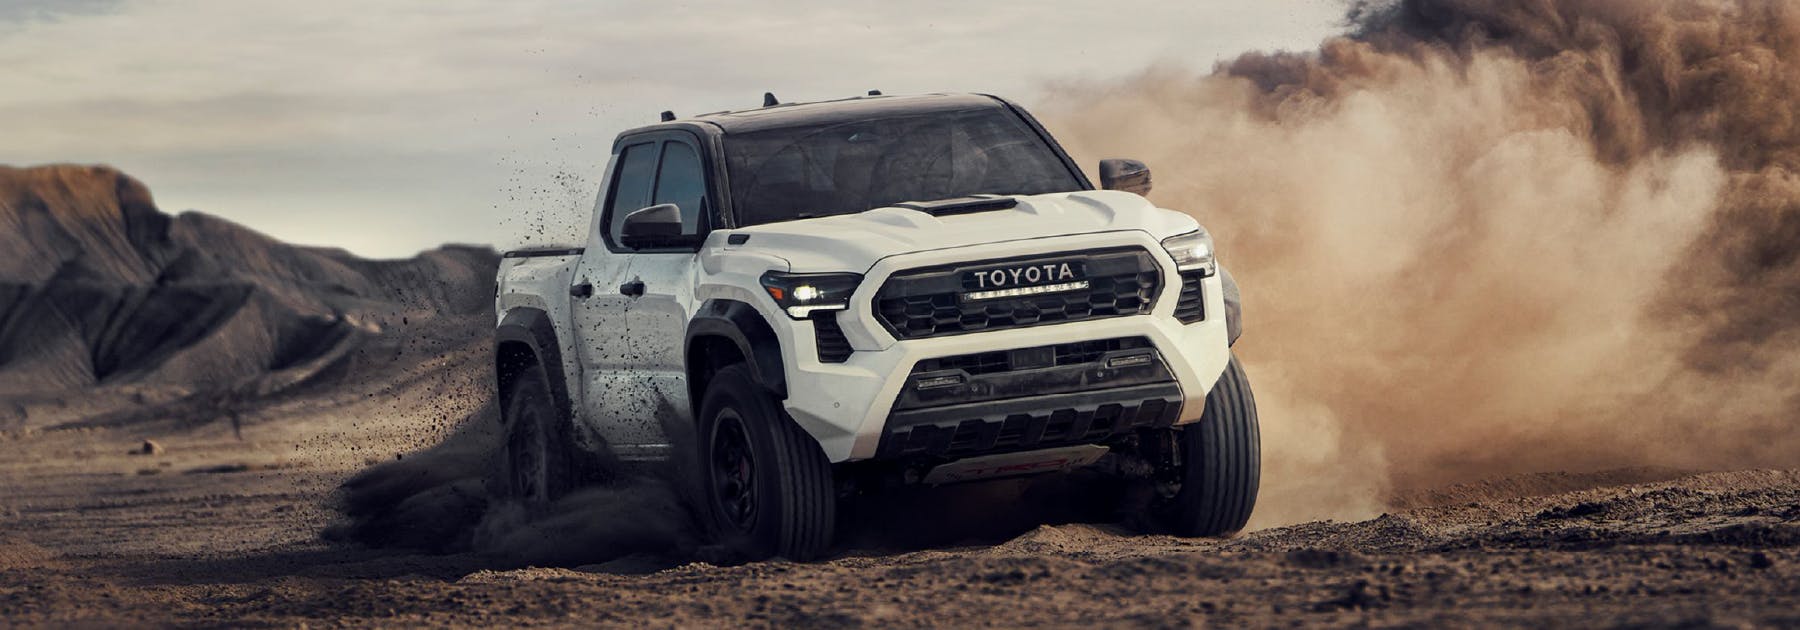 white Toyota Tacoma off-road driving